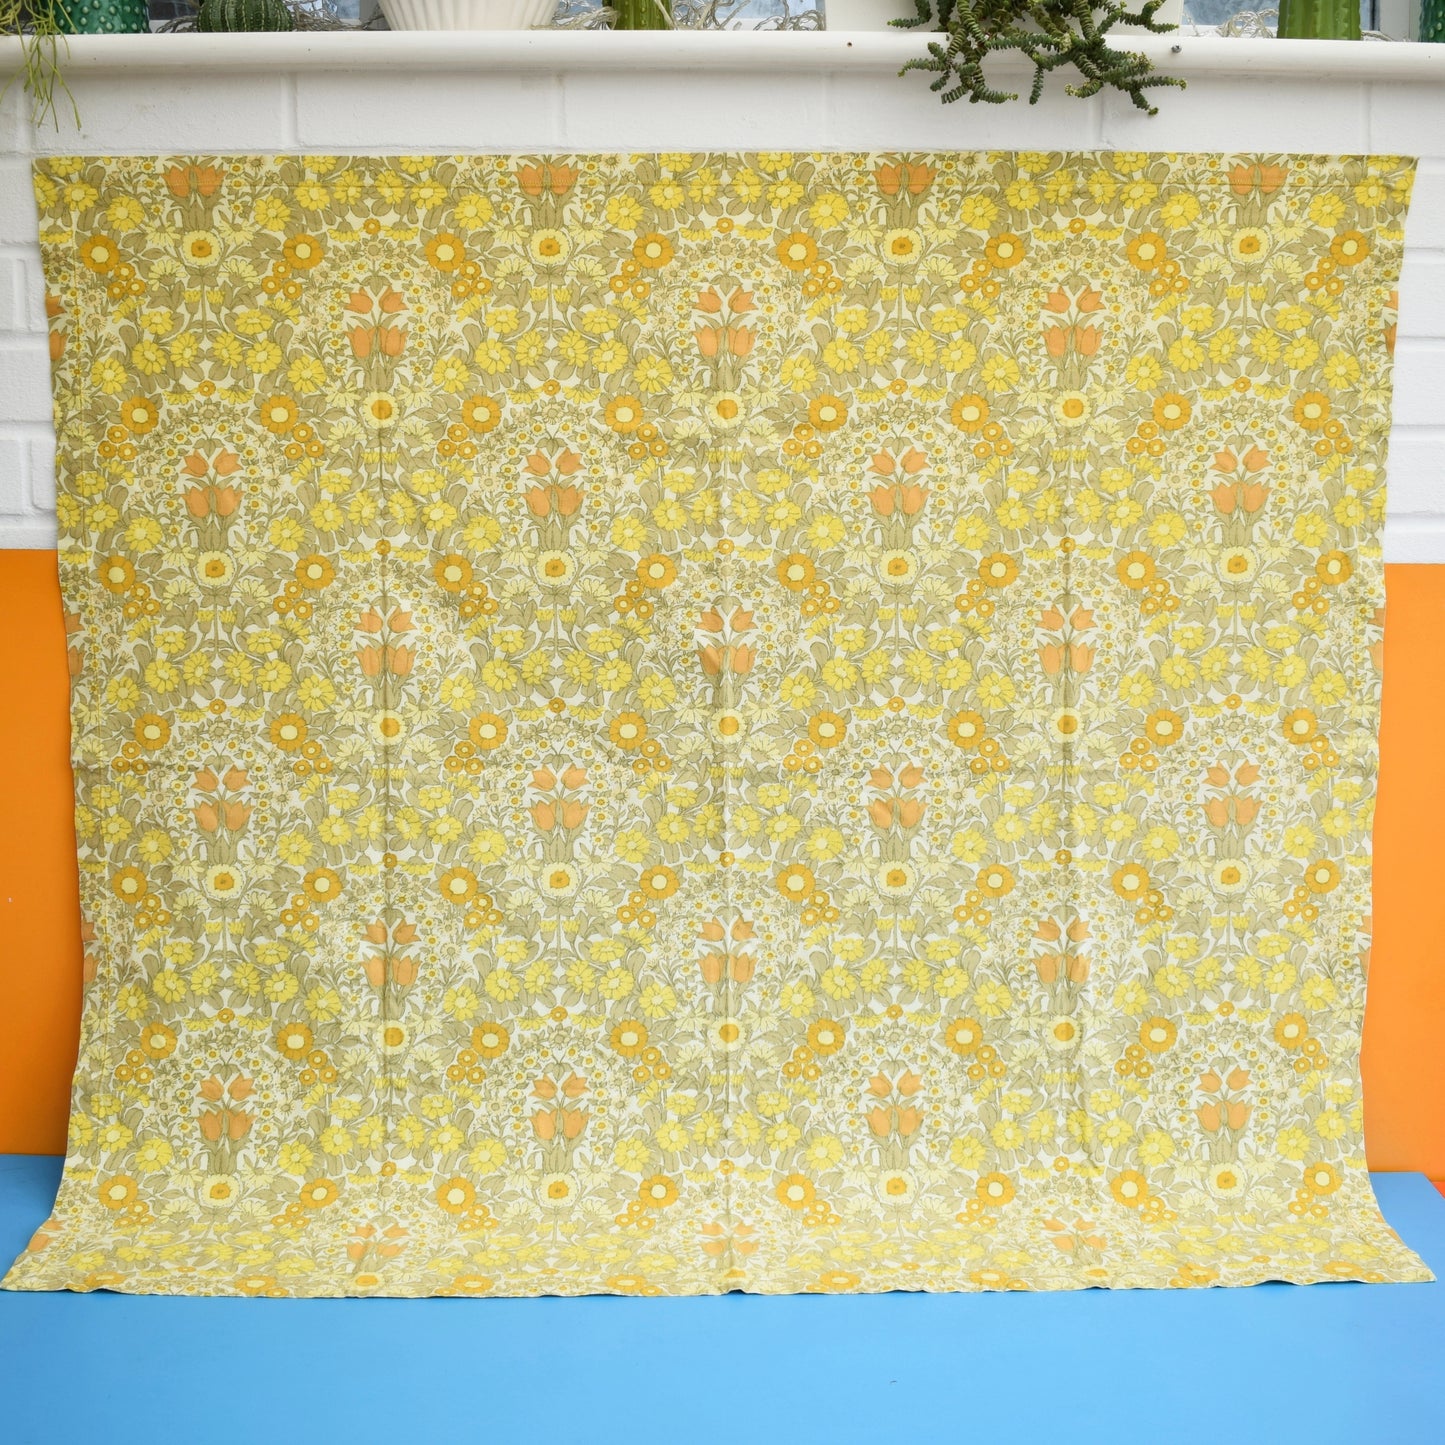 Vintage 1970s Pat Albeck - Daisy Chain Tablecloth - Yellow